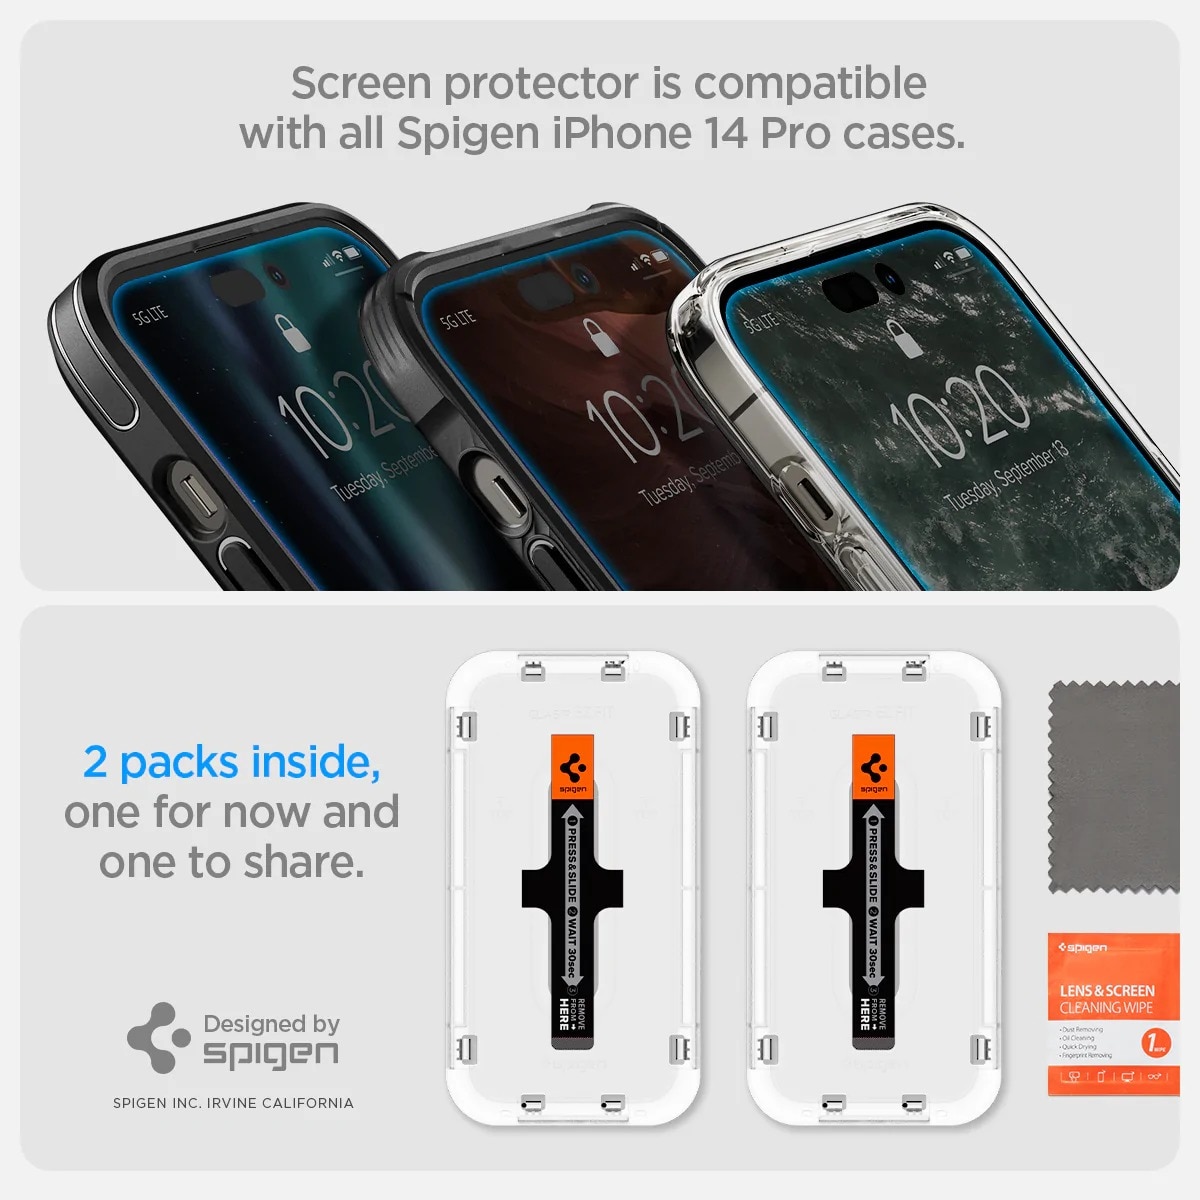 iPhone 14 Pro Screen Protector GLAS EZ Fit (2-pack)